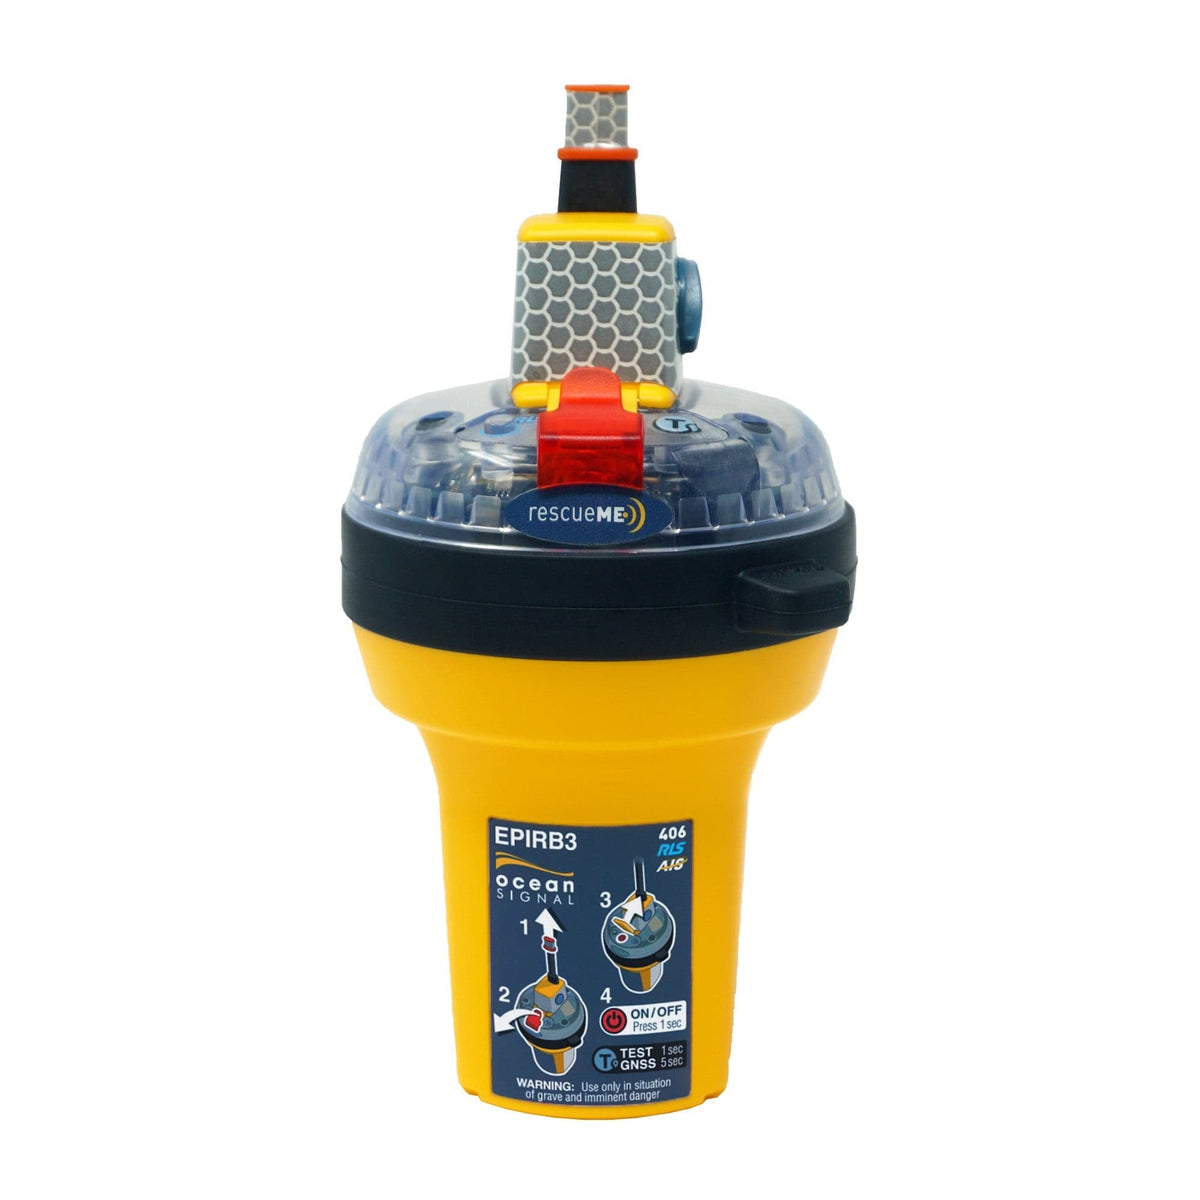 Ocean Signal Qualifies for Free Shipping Ocean Signal rescueME EPIRB3 Cat I with AIS and RLS #702S-03933